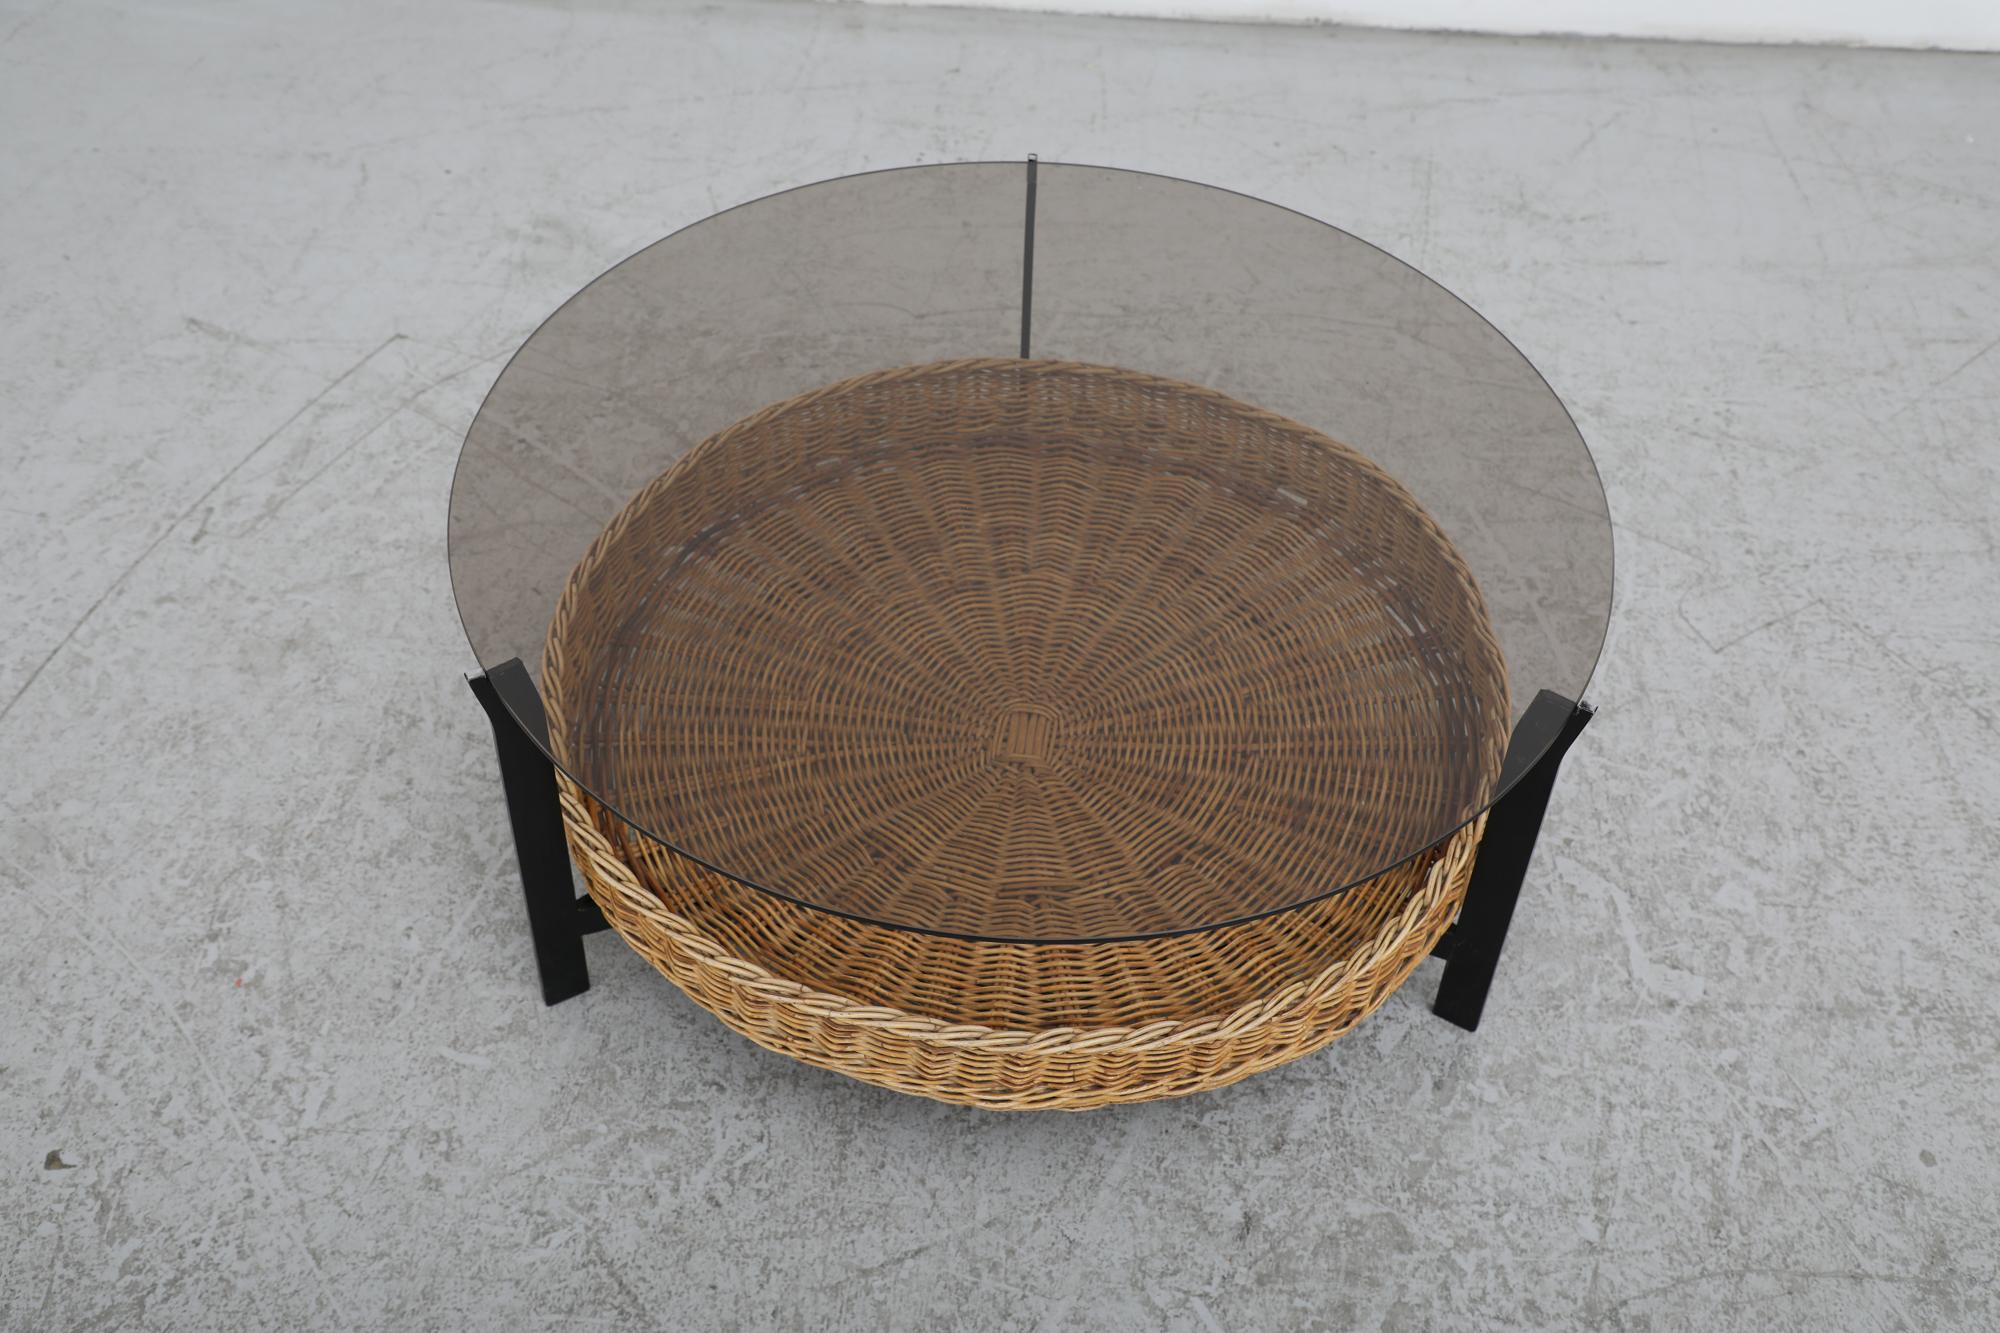 Metal Mid-Century Round Modernist Coffee Table with Smoked Glass and Rattan Basket For Sale